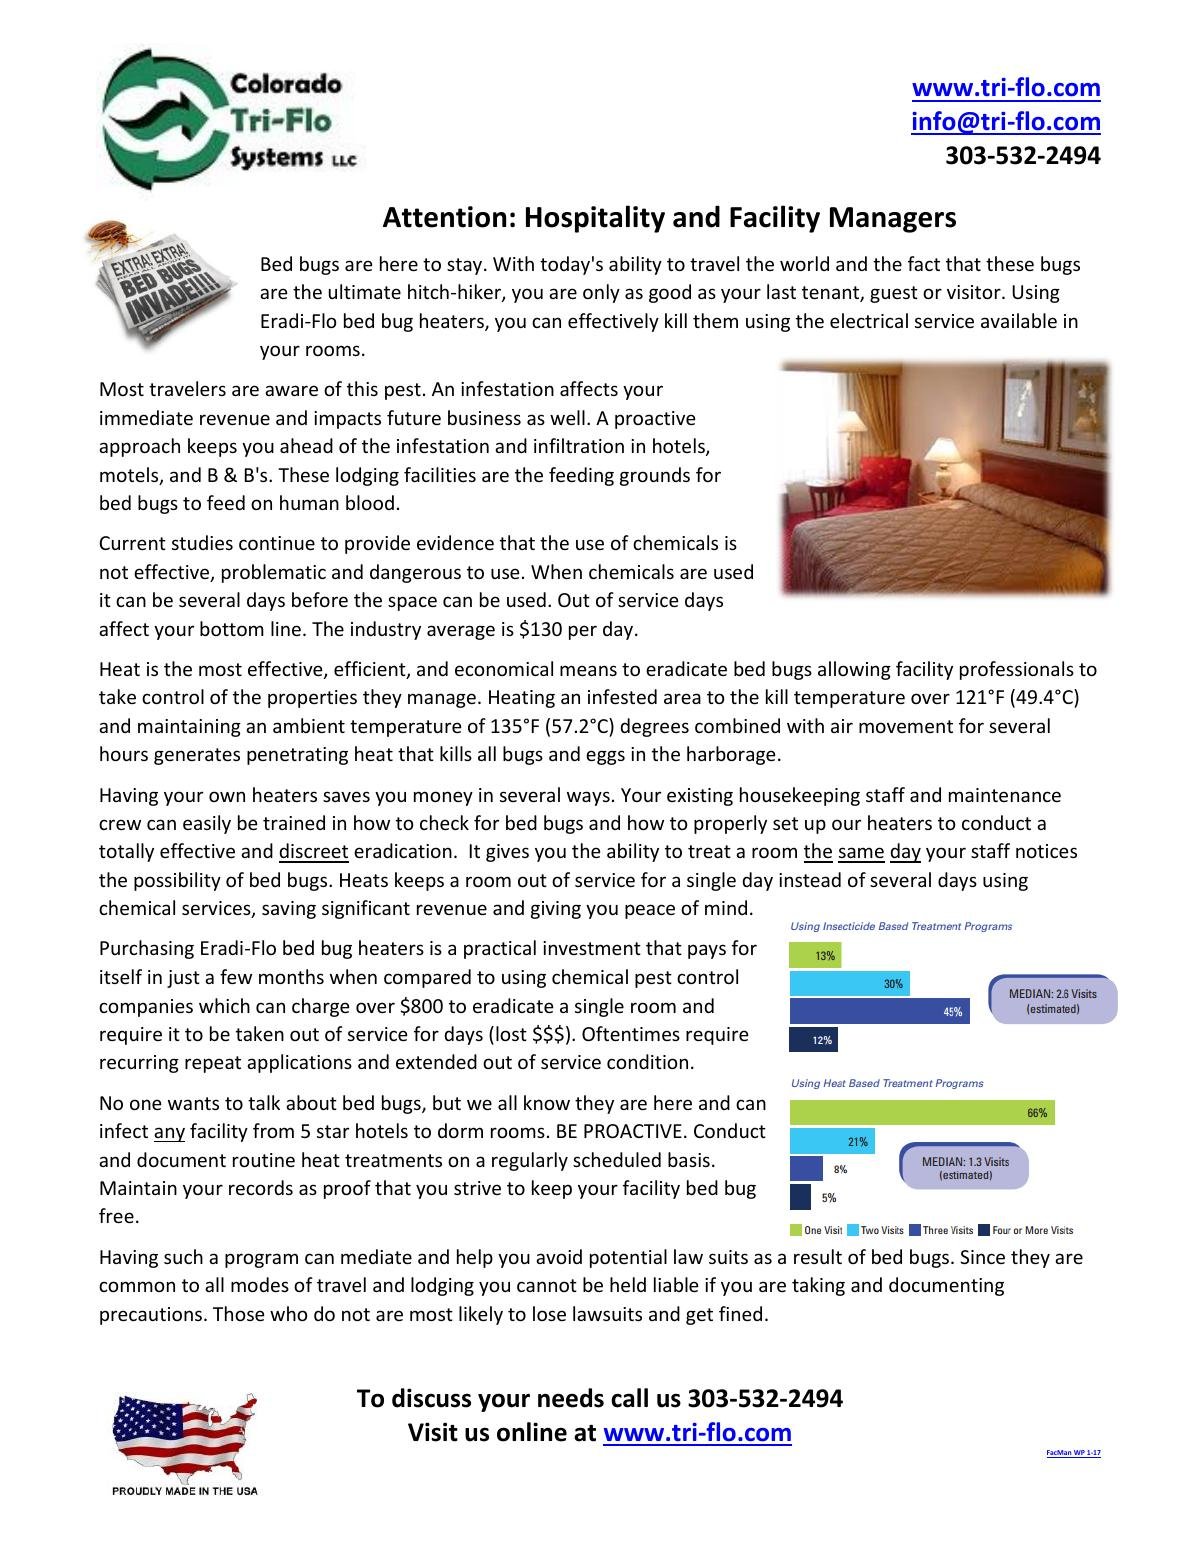 Attention: Hospitality and Facility Managers Do You Have Bed Bugs?